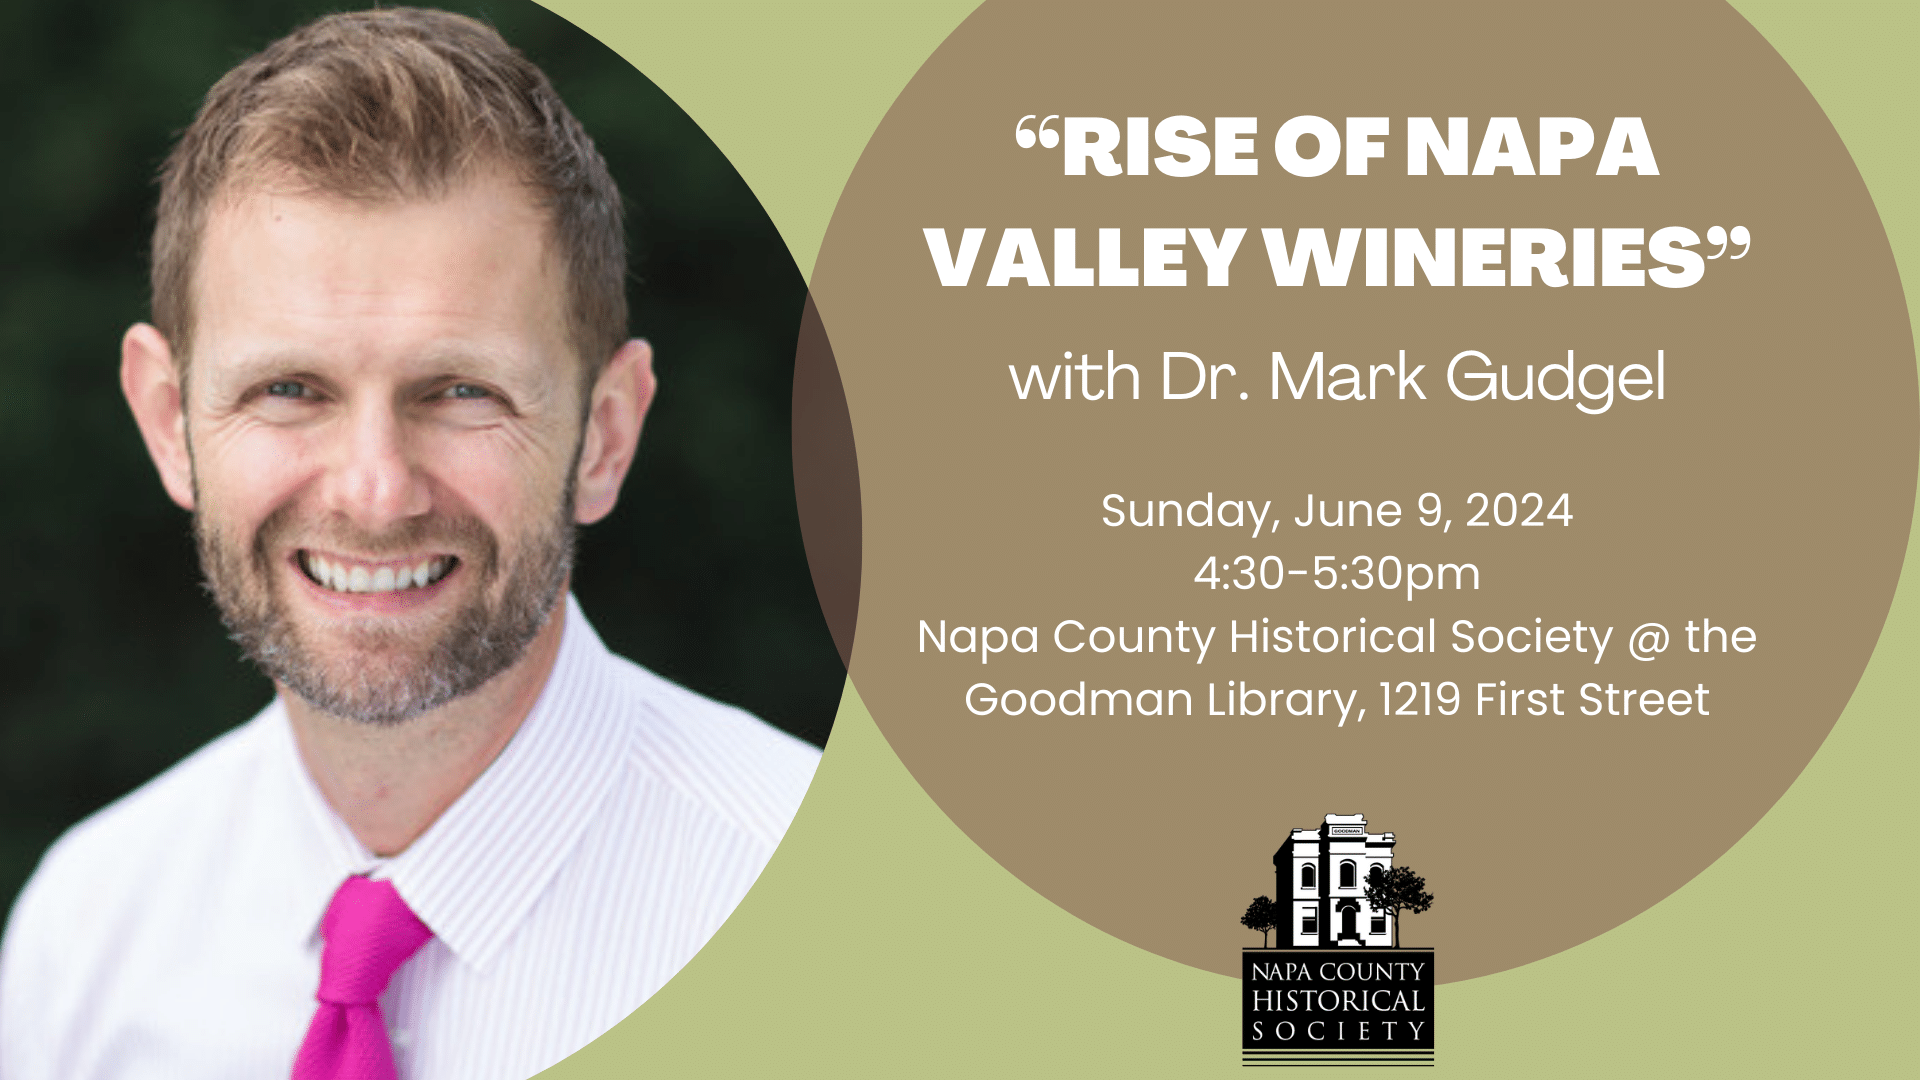 Rise of Napa Valley Wineries with Dr. Mark Gudgel, Sunday June 9 2024. 4:30pm to 5:30pm.